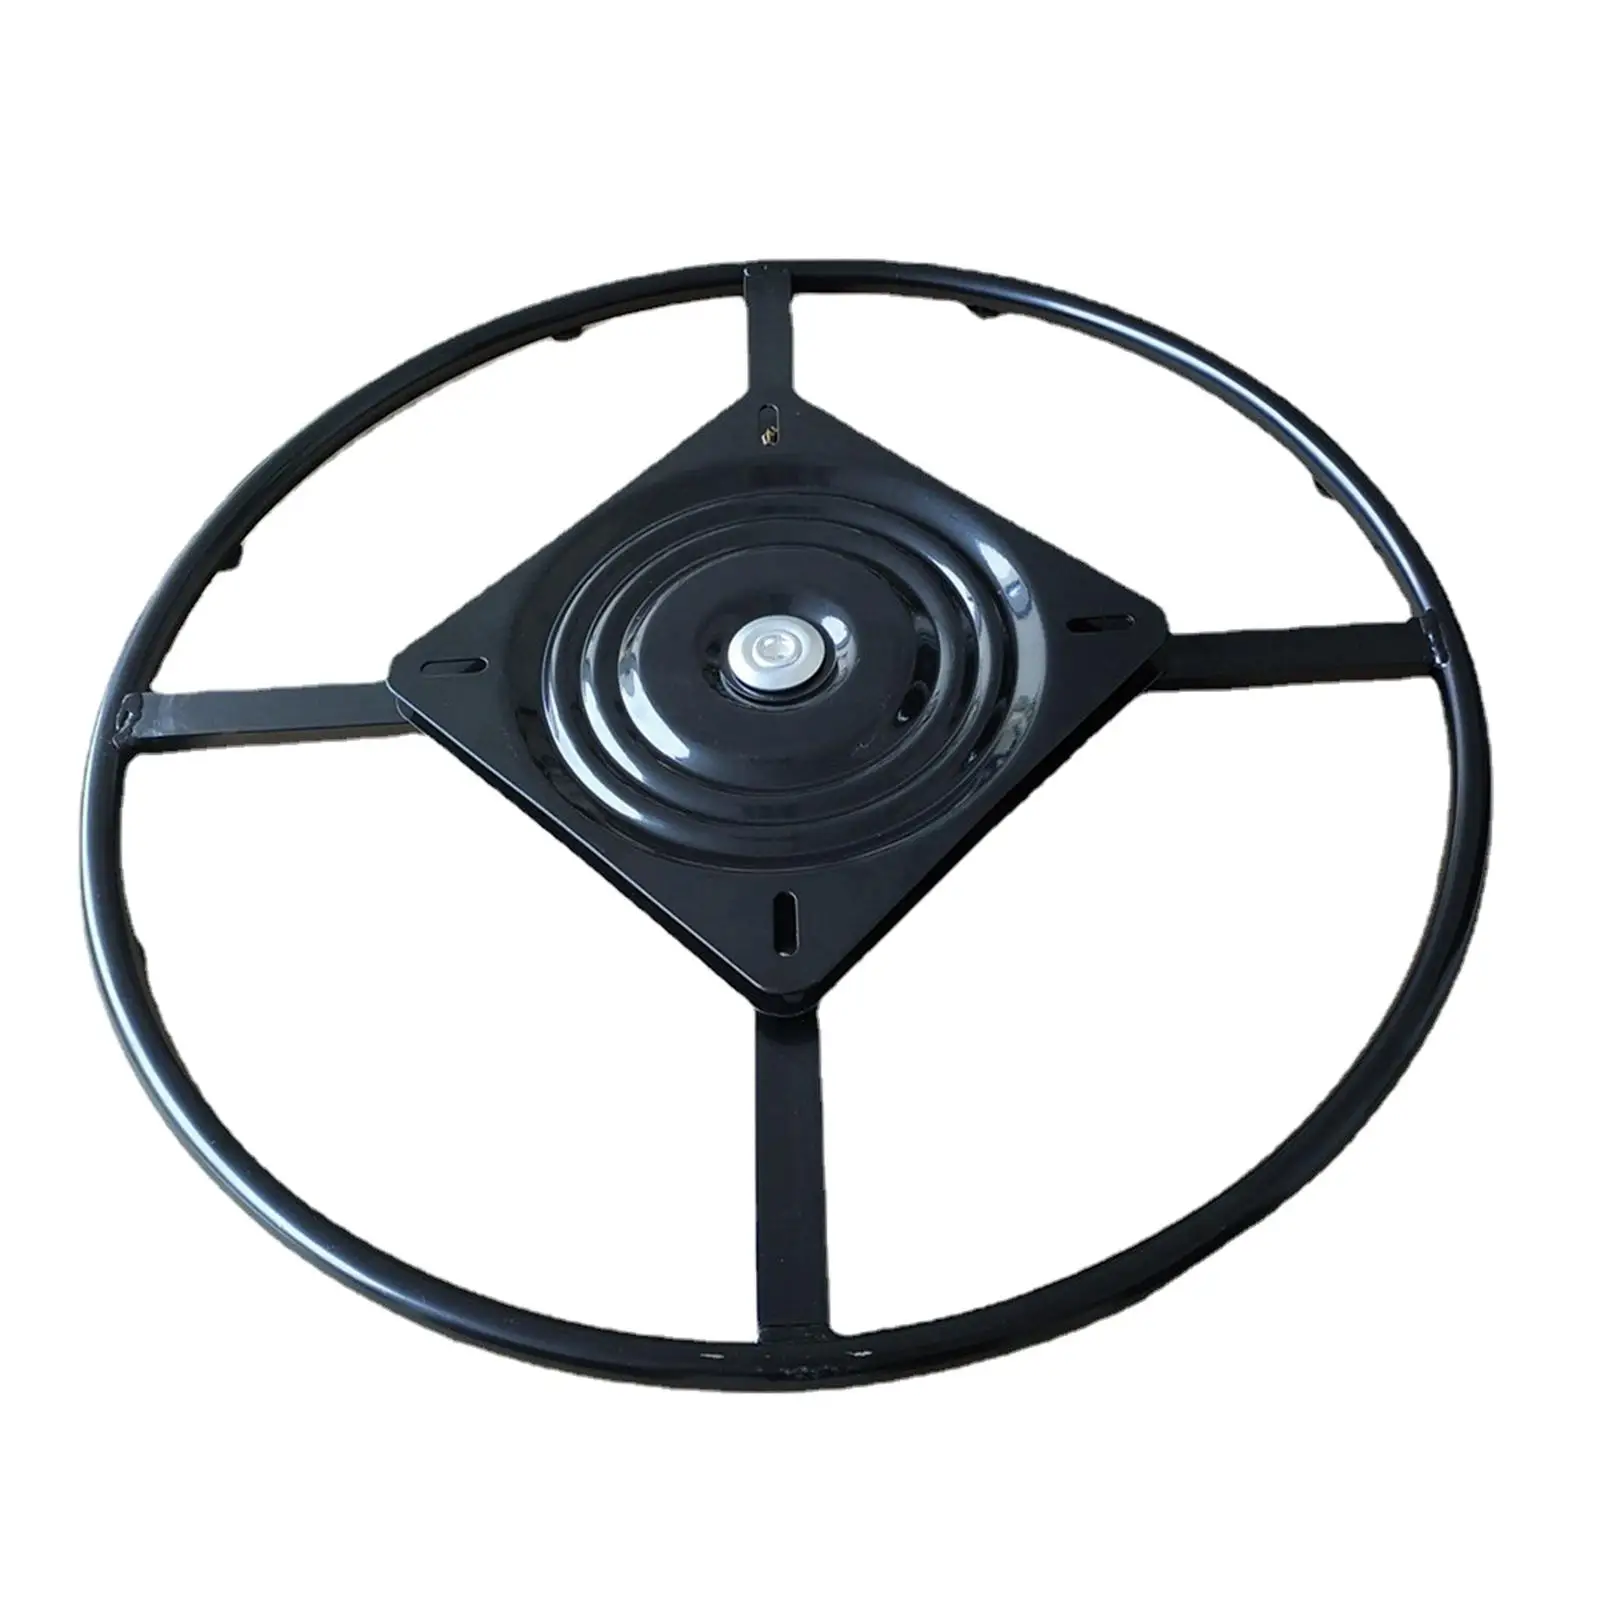 600mm Swivel Chair recliner Base Bracket 360 Degree Rotate with 10 inch Square Plate Replaces Durable Black Finished Spare Parts